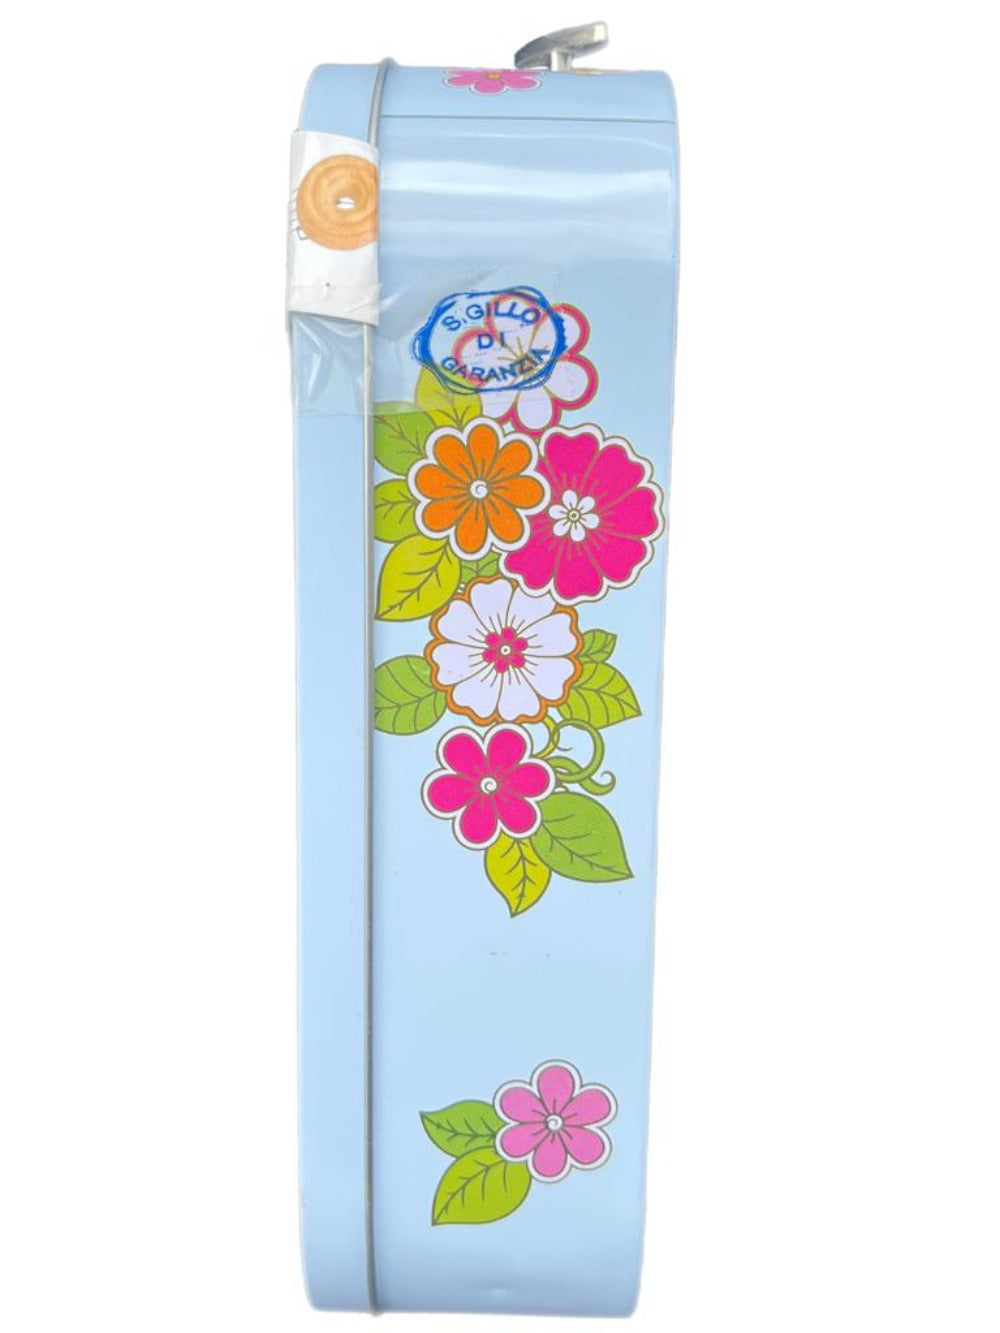 Marie Ange di Costa Flower Fairy Italian Tin with Butter Biscuits—Bambina Series in Sky Blue 140g